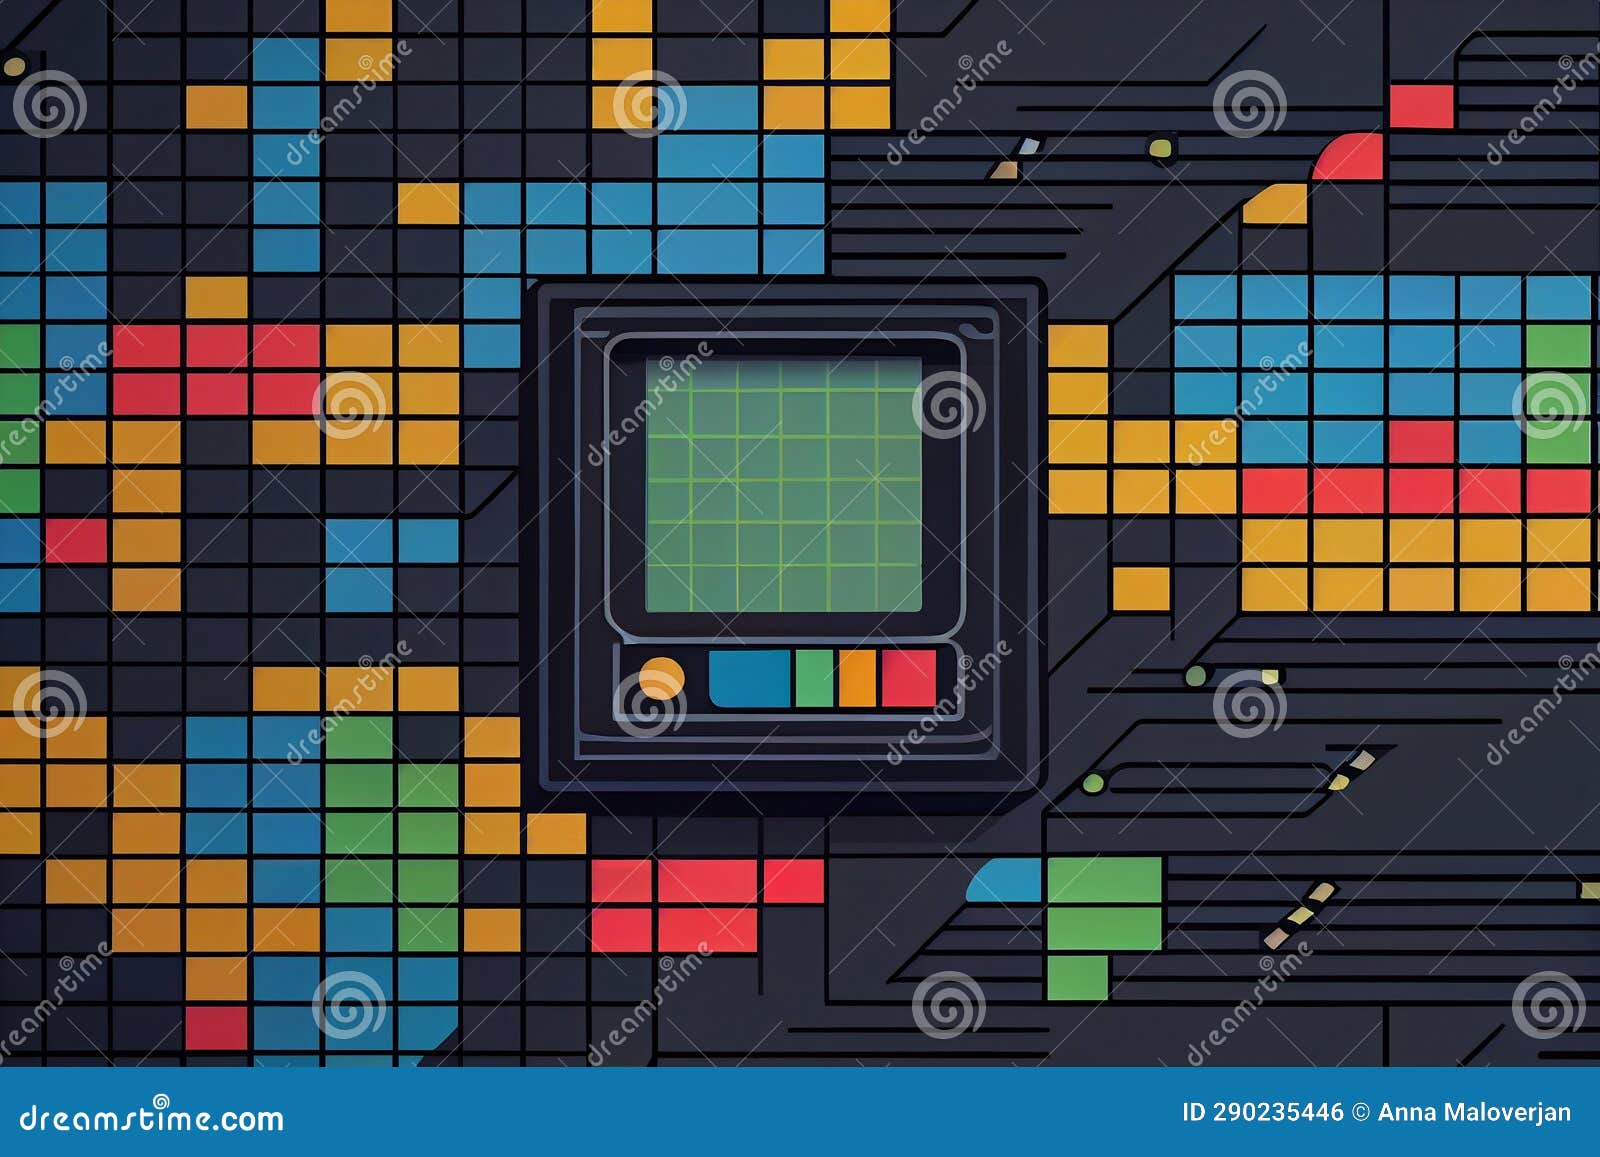 background in 80s, 90s style. wallpaper or poster blank. geometric pattern. computer tiled